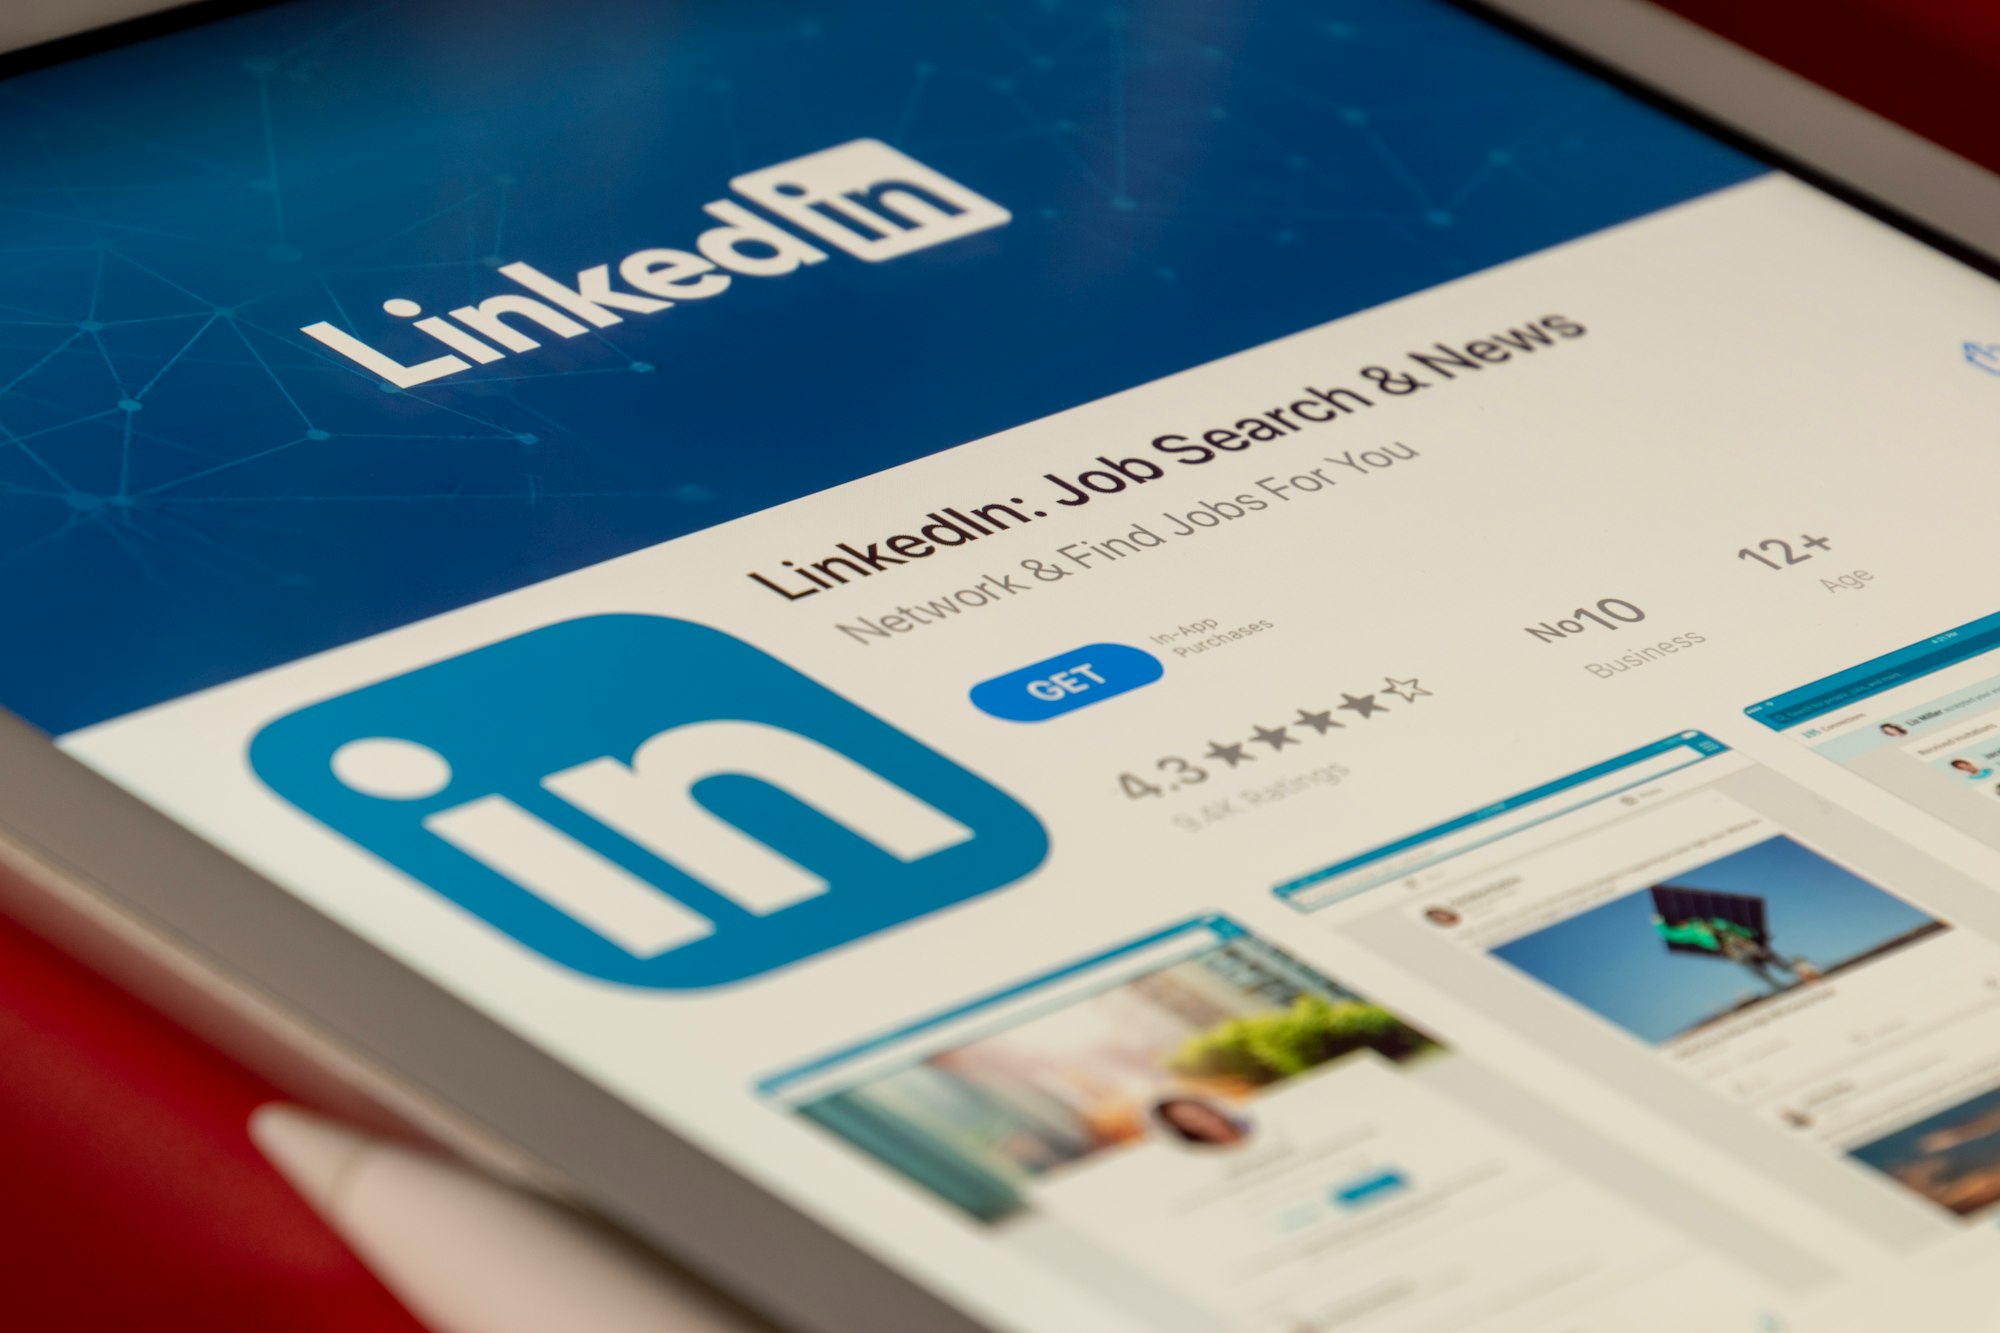 How to Use LinkedIn for Networking and Job Search